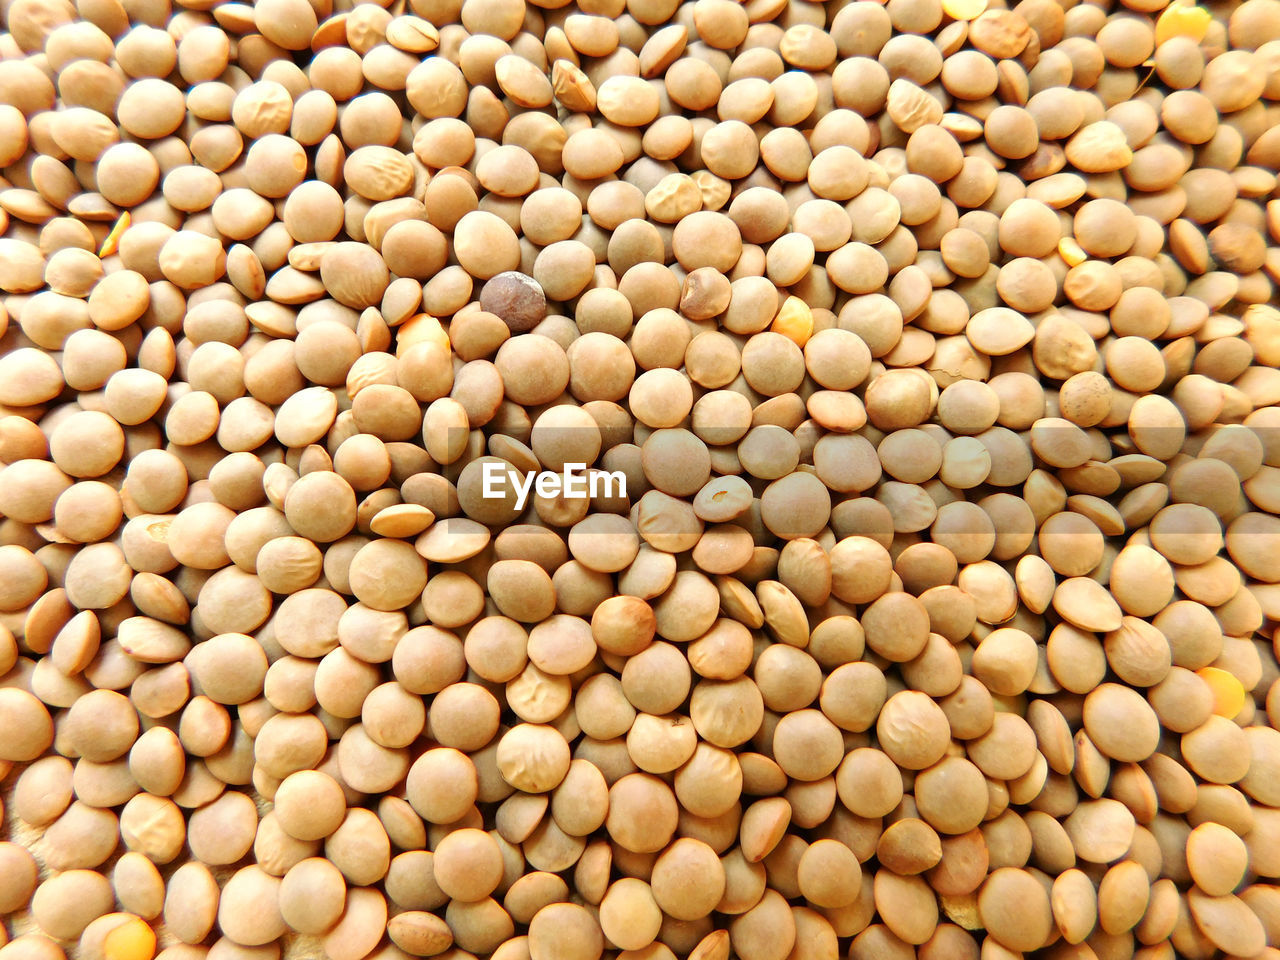 High angle view of lentils